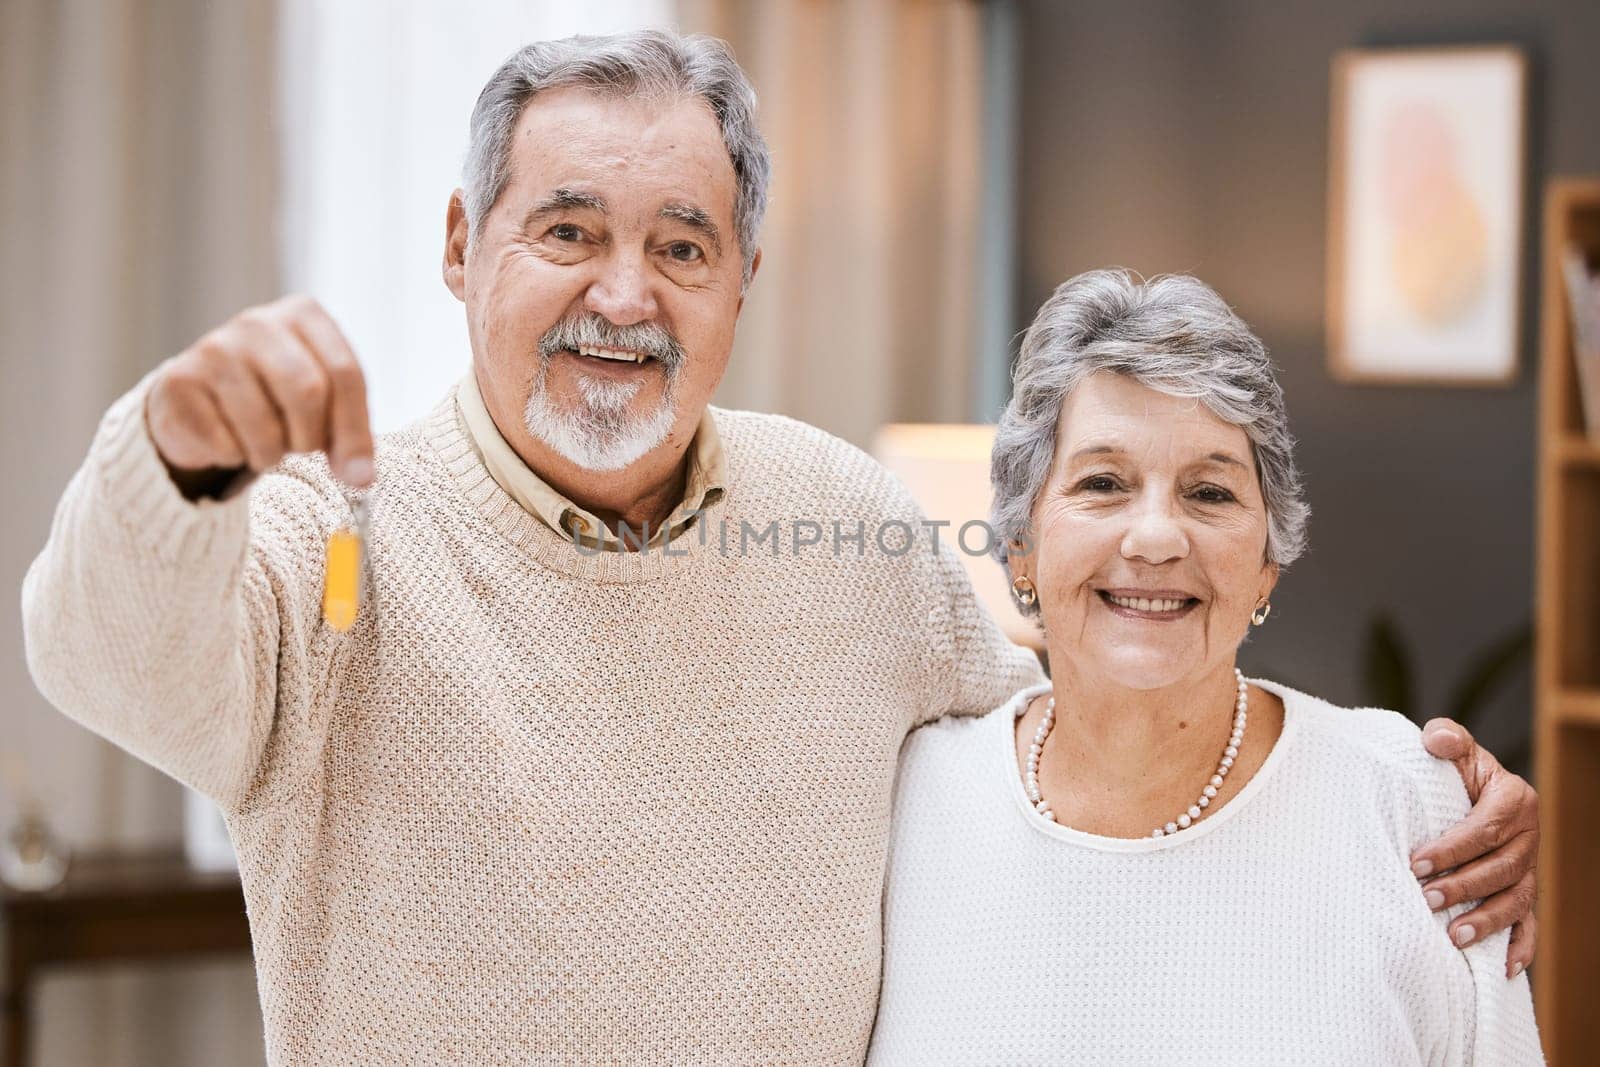 Real estate keys, senior couple and portrait of new home owner happy with apartment, house or property investment. Retirement love, mortgage and elderly marriage people smile for estate purchase sale.